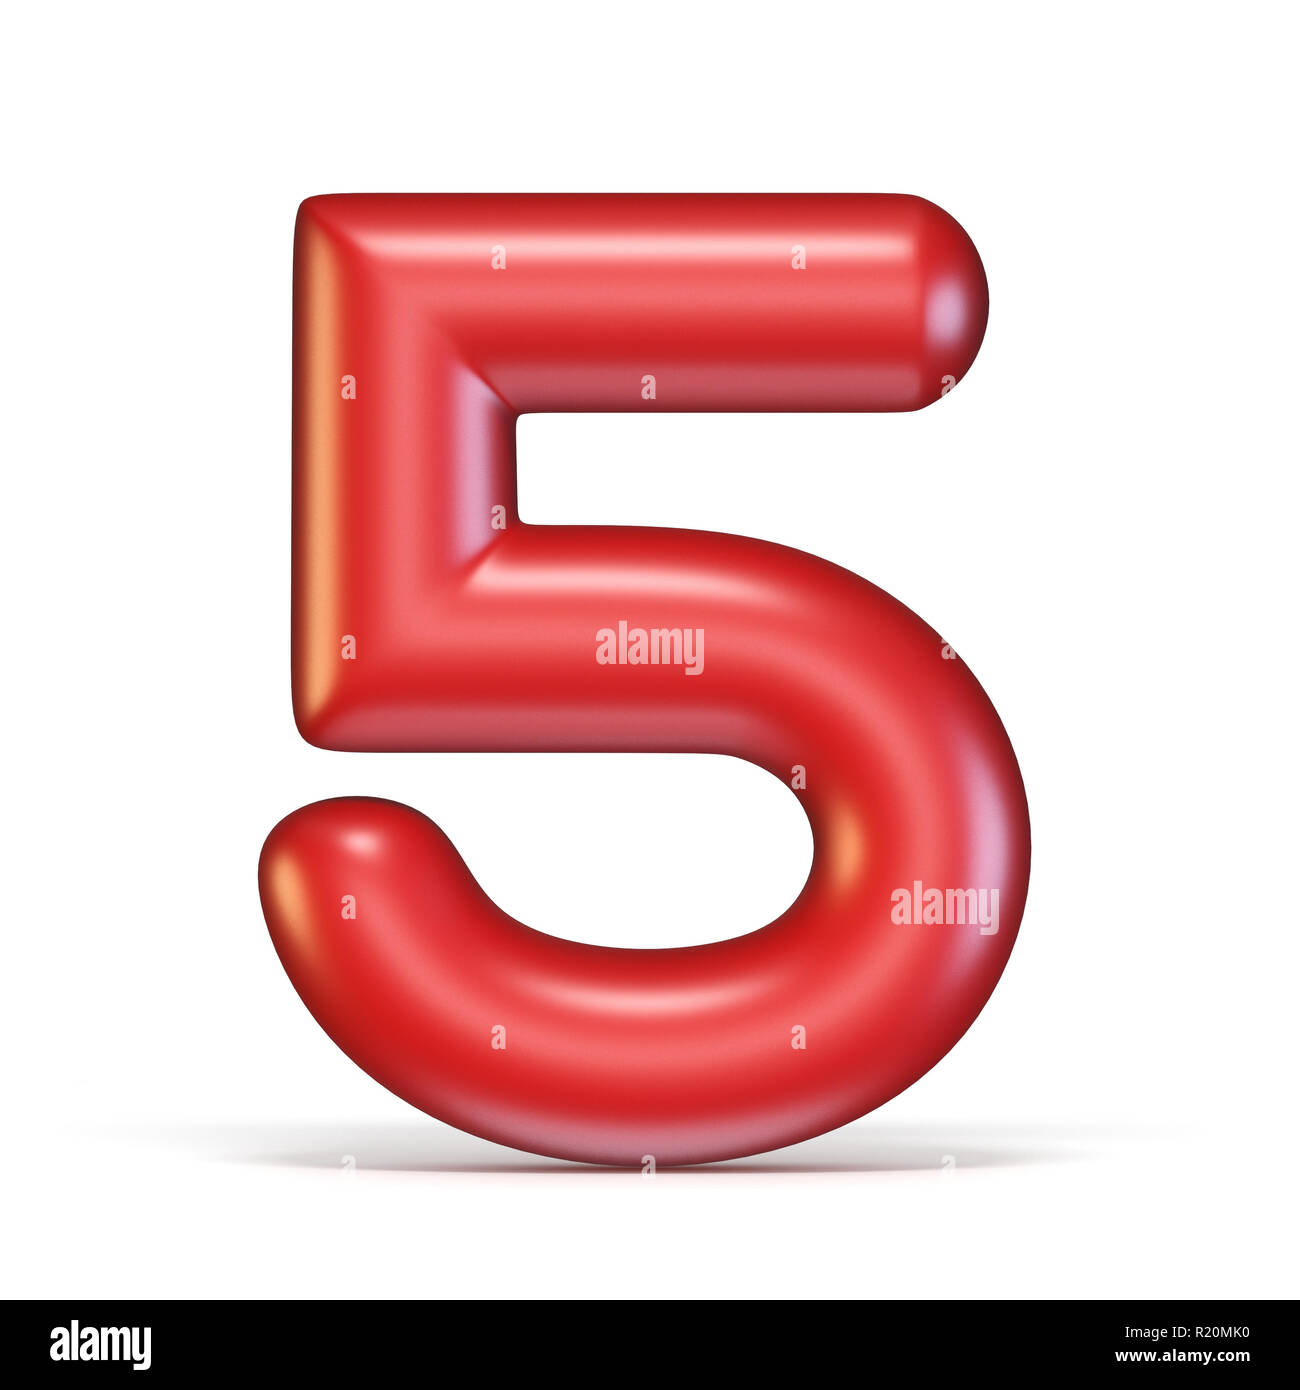 Red glossy font Number 5 FIVE 3D rendering illustration isolated on white background Stock Photo